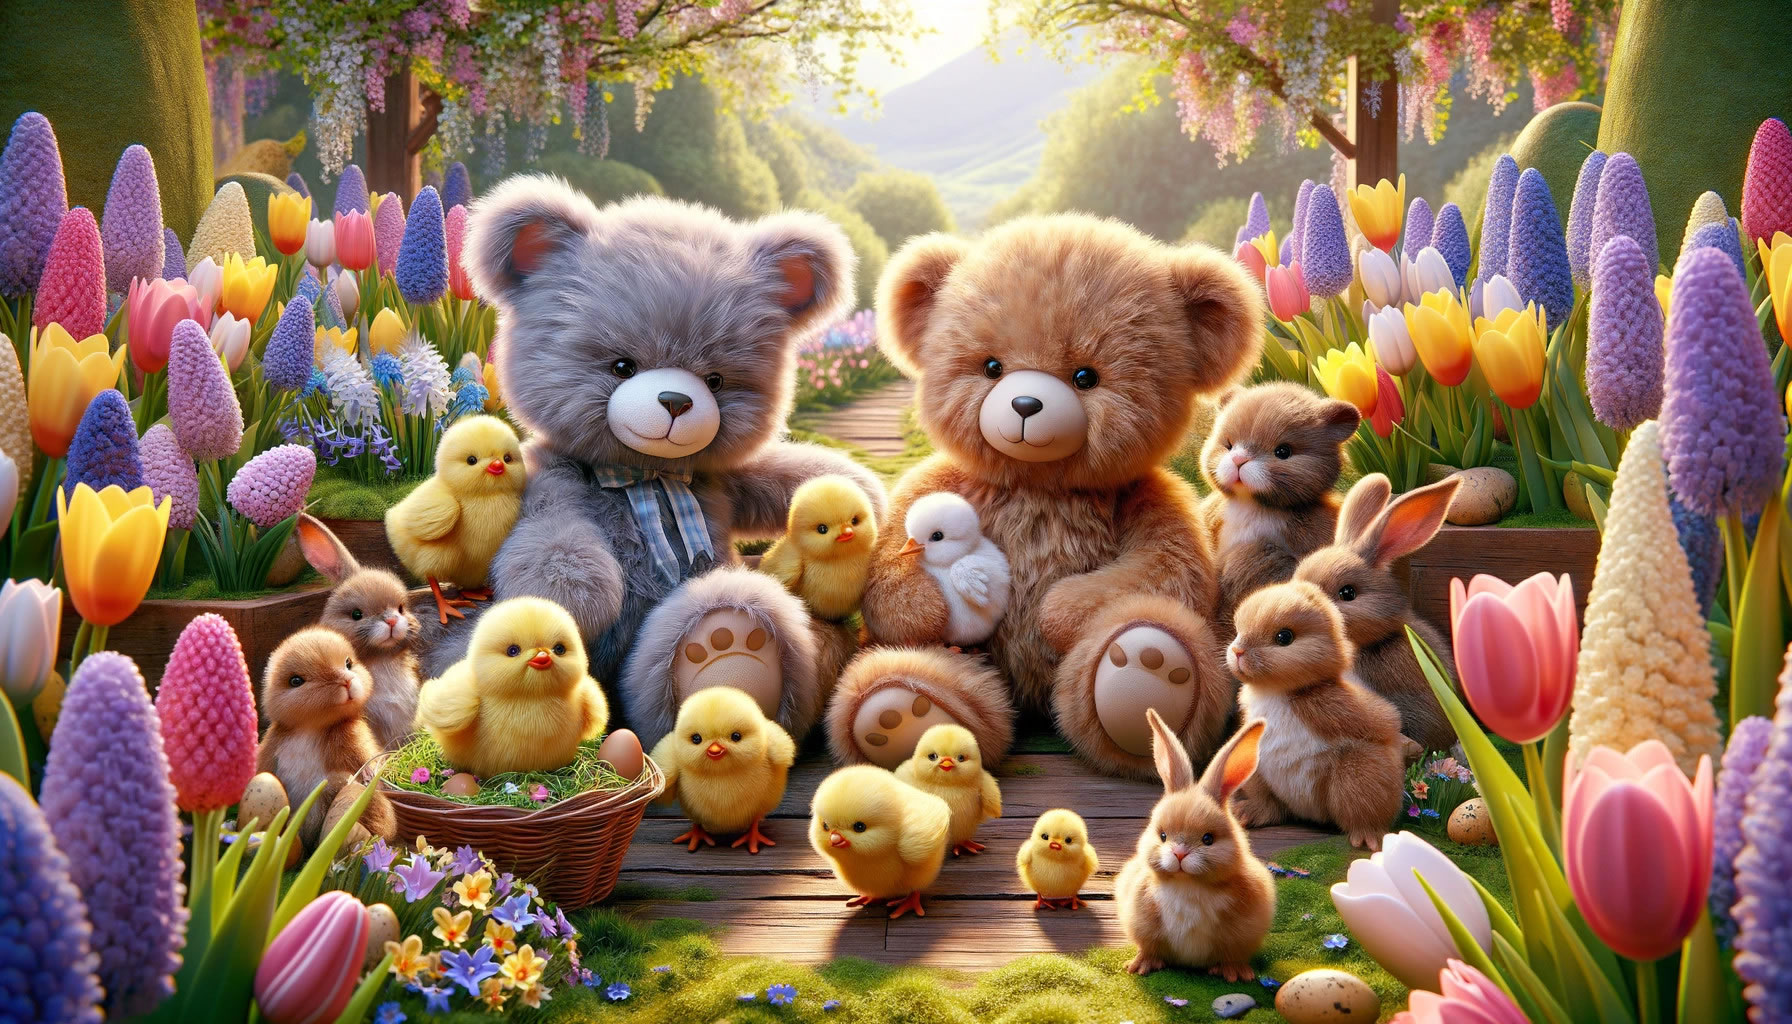 Easter Holidays Picture of Teddy, bunnies and Easter Eggs